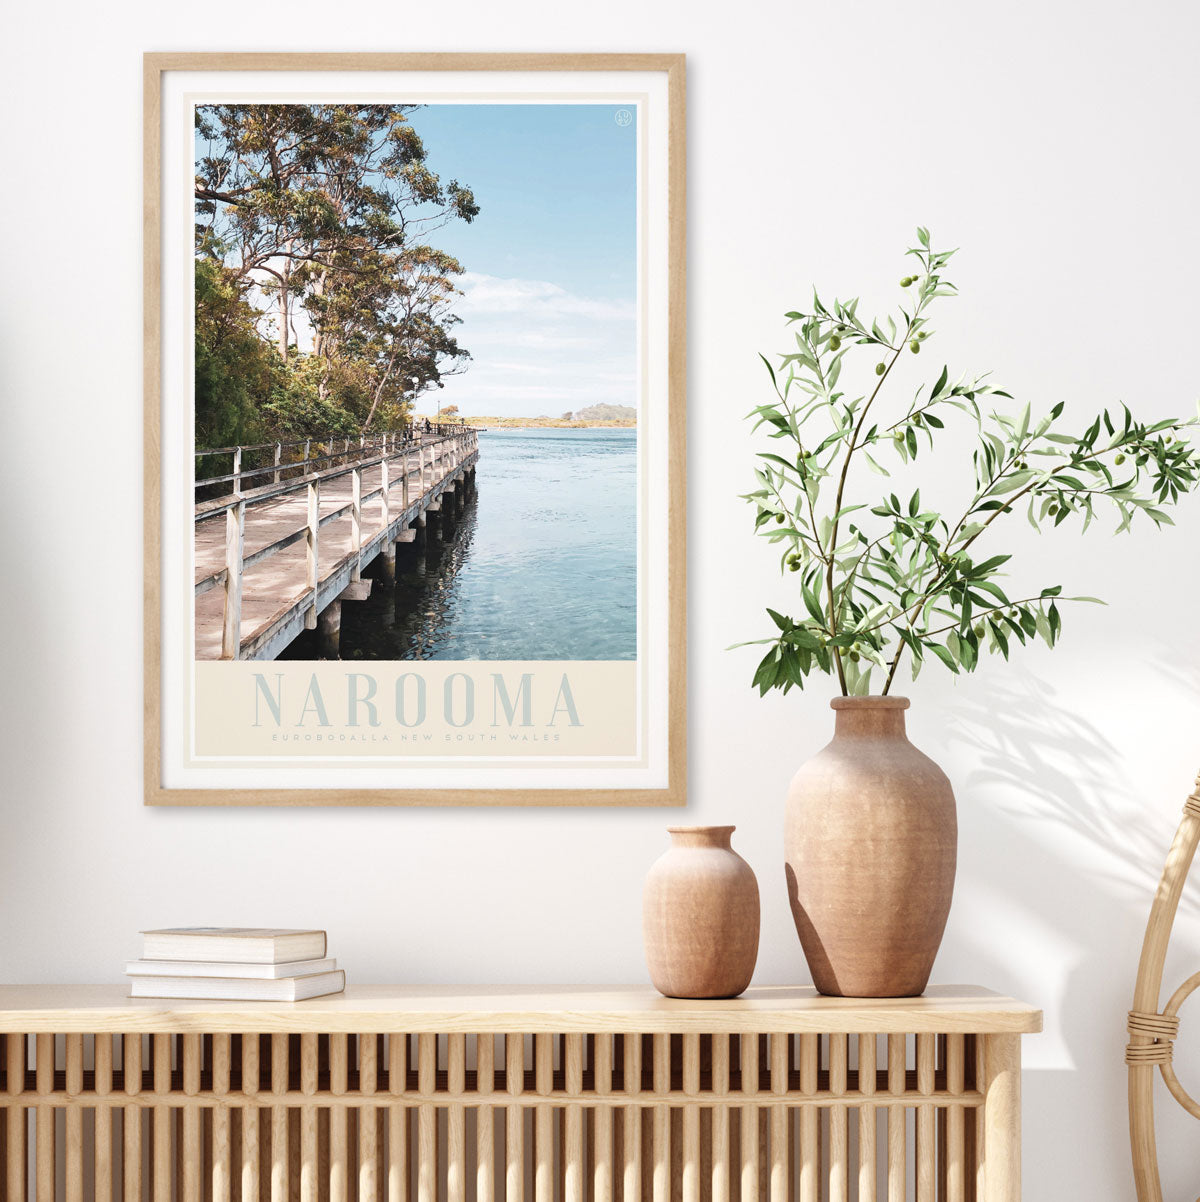 Narooma boardwalk vintage travel style framed print by places we luv